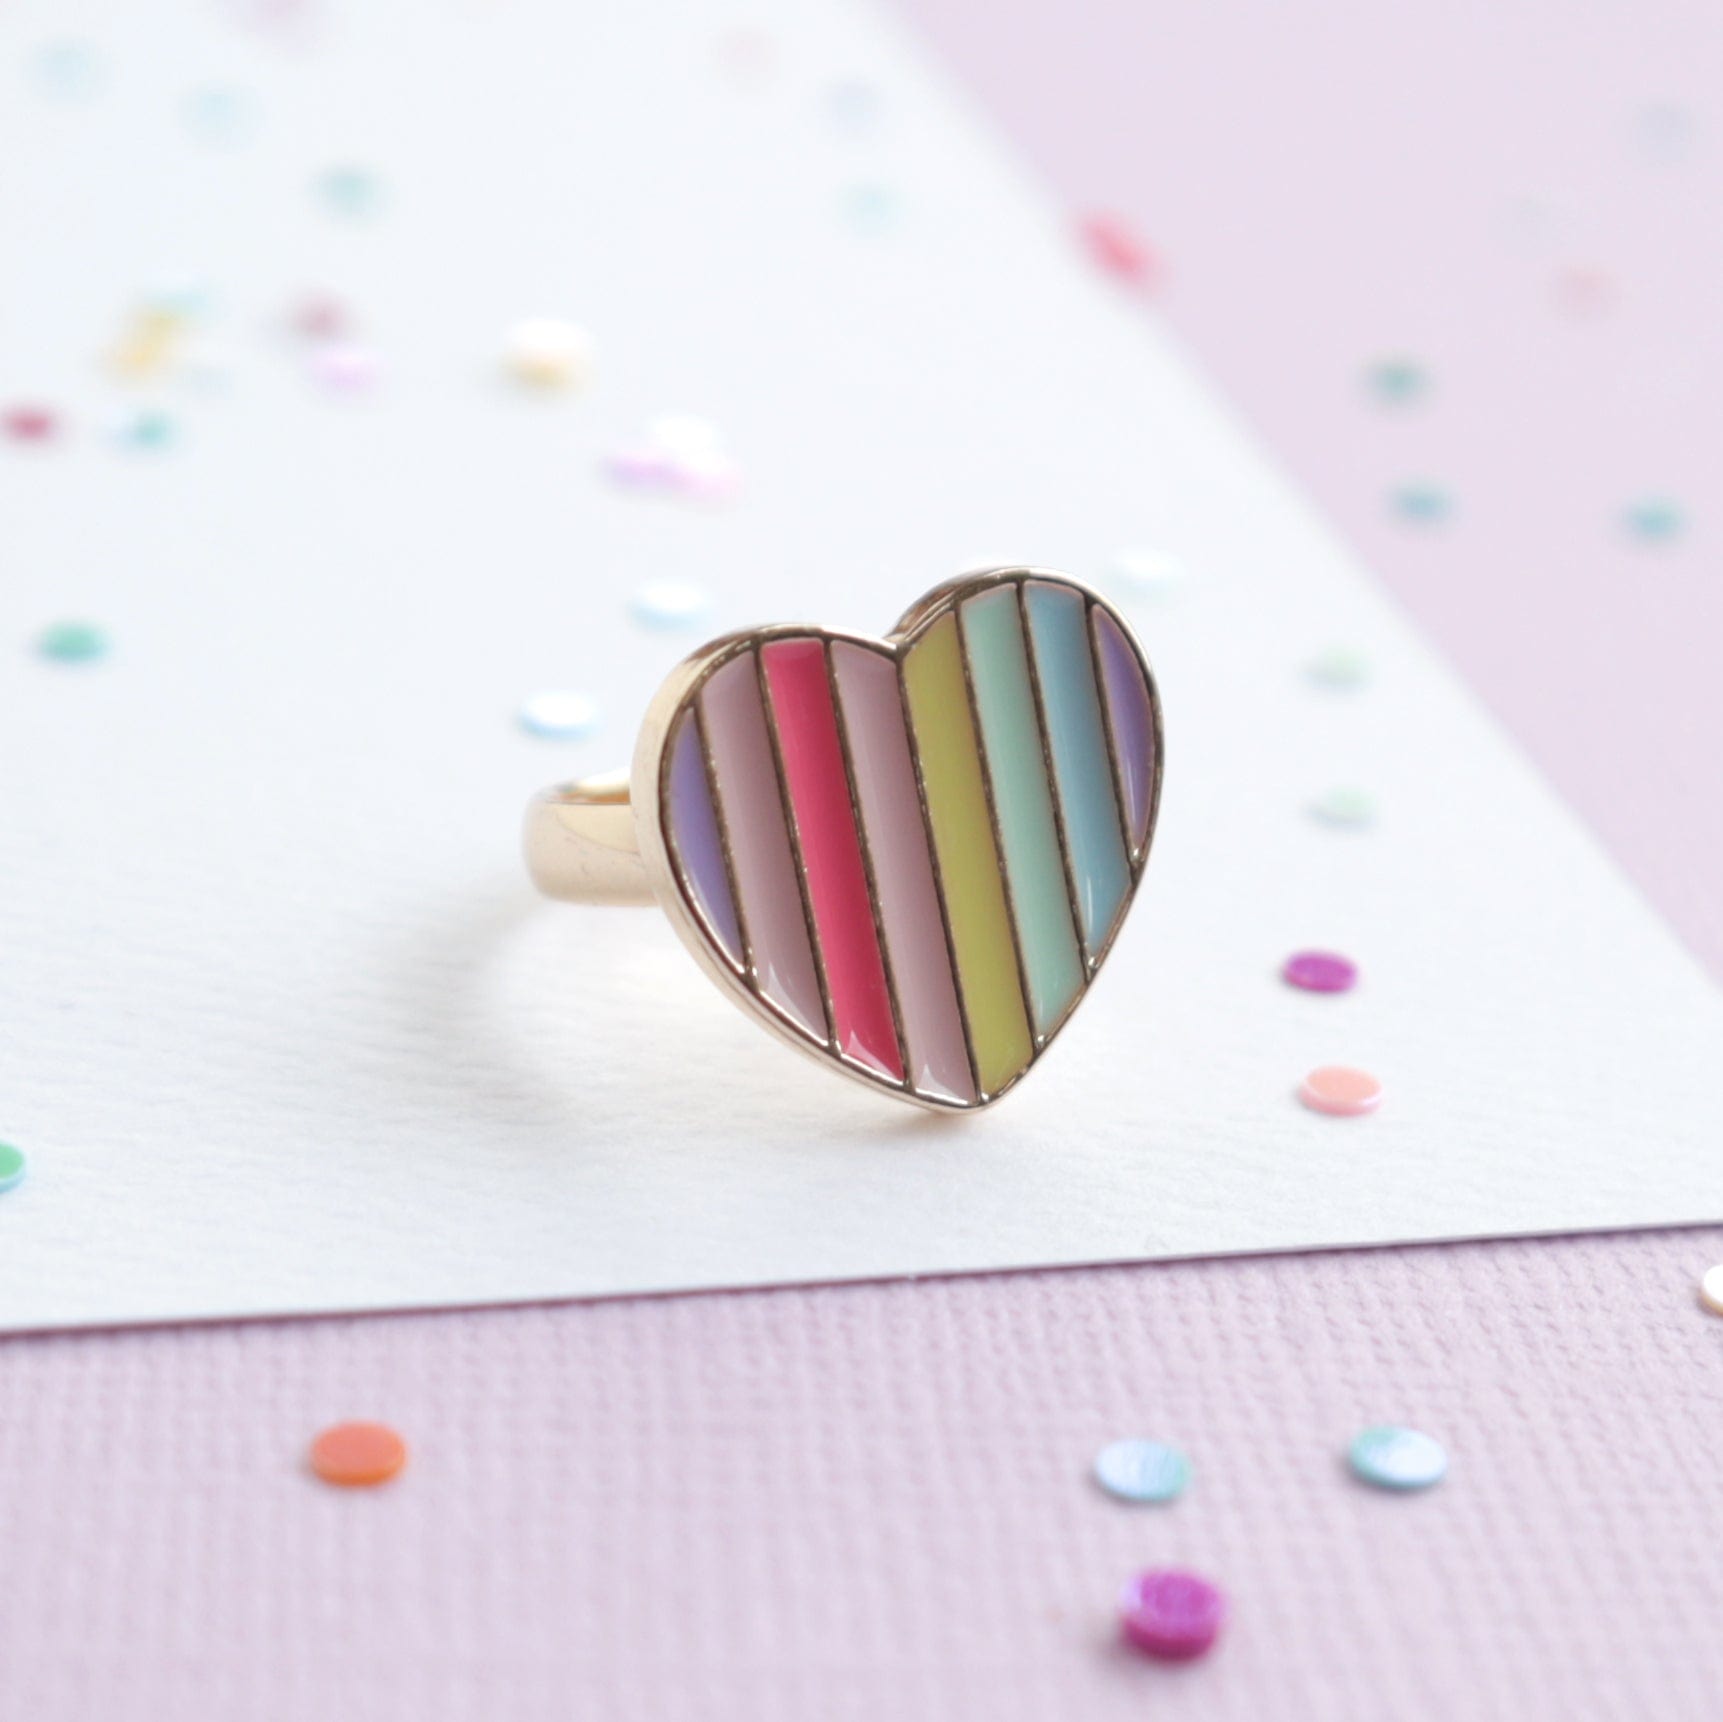 Mon Coco Girls Accessory Candy Heart Ring